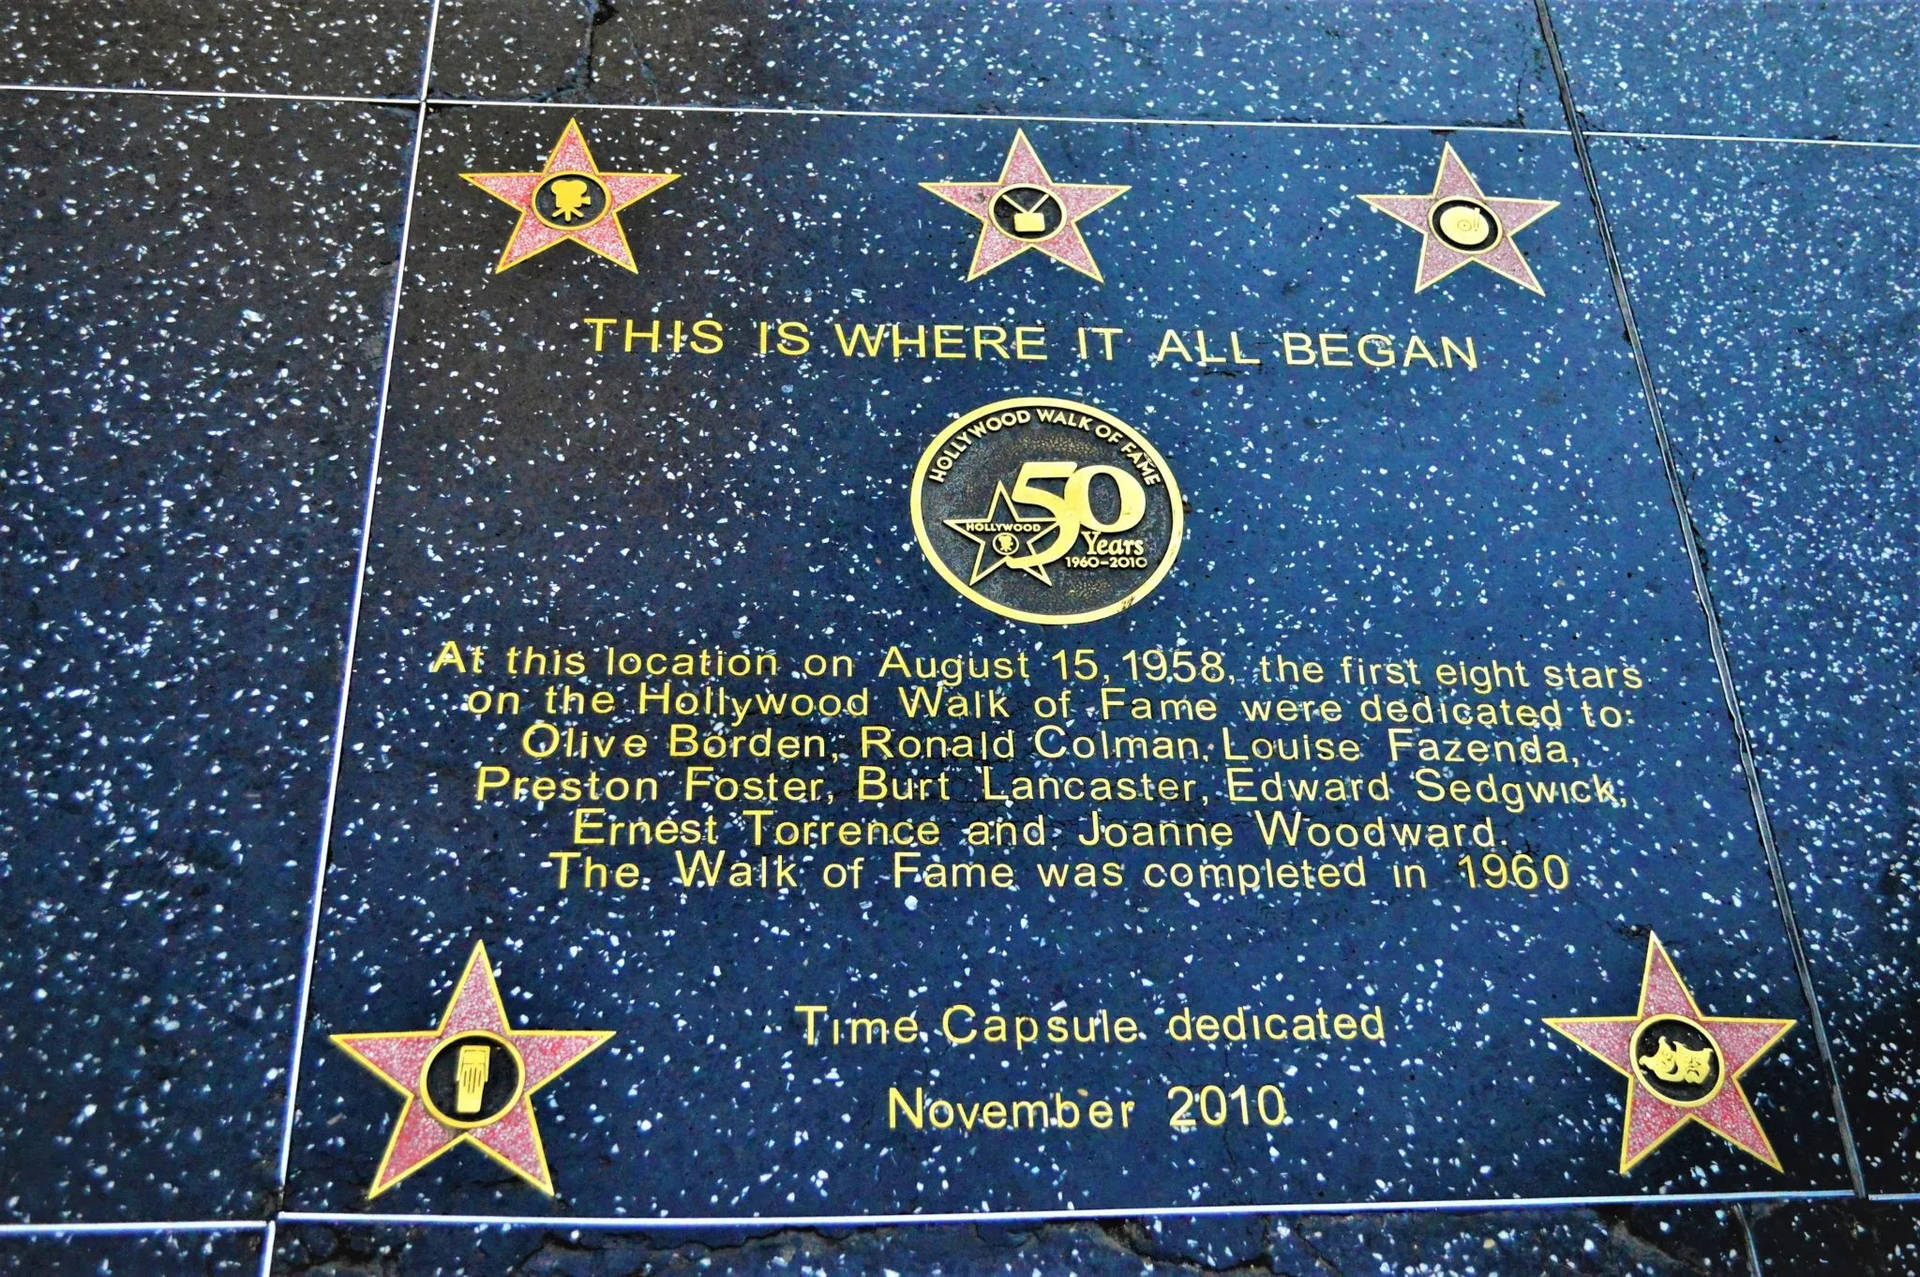 Caption: A Close Up Of A Hollywood Walk Of Fame Inscription